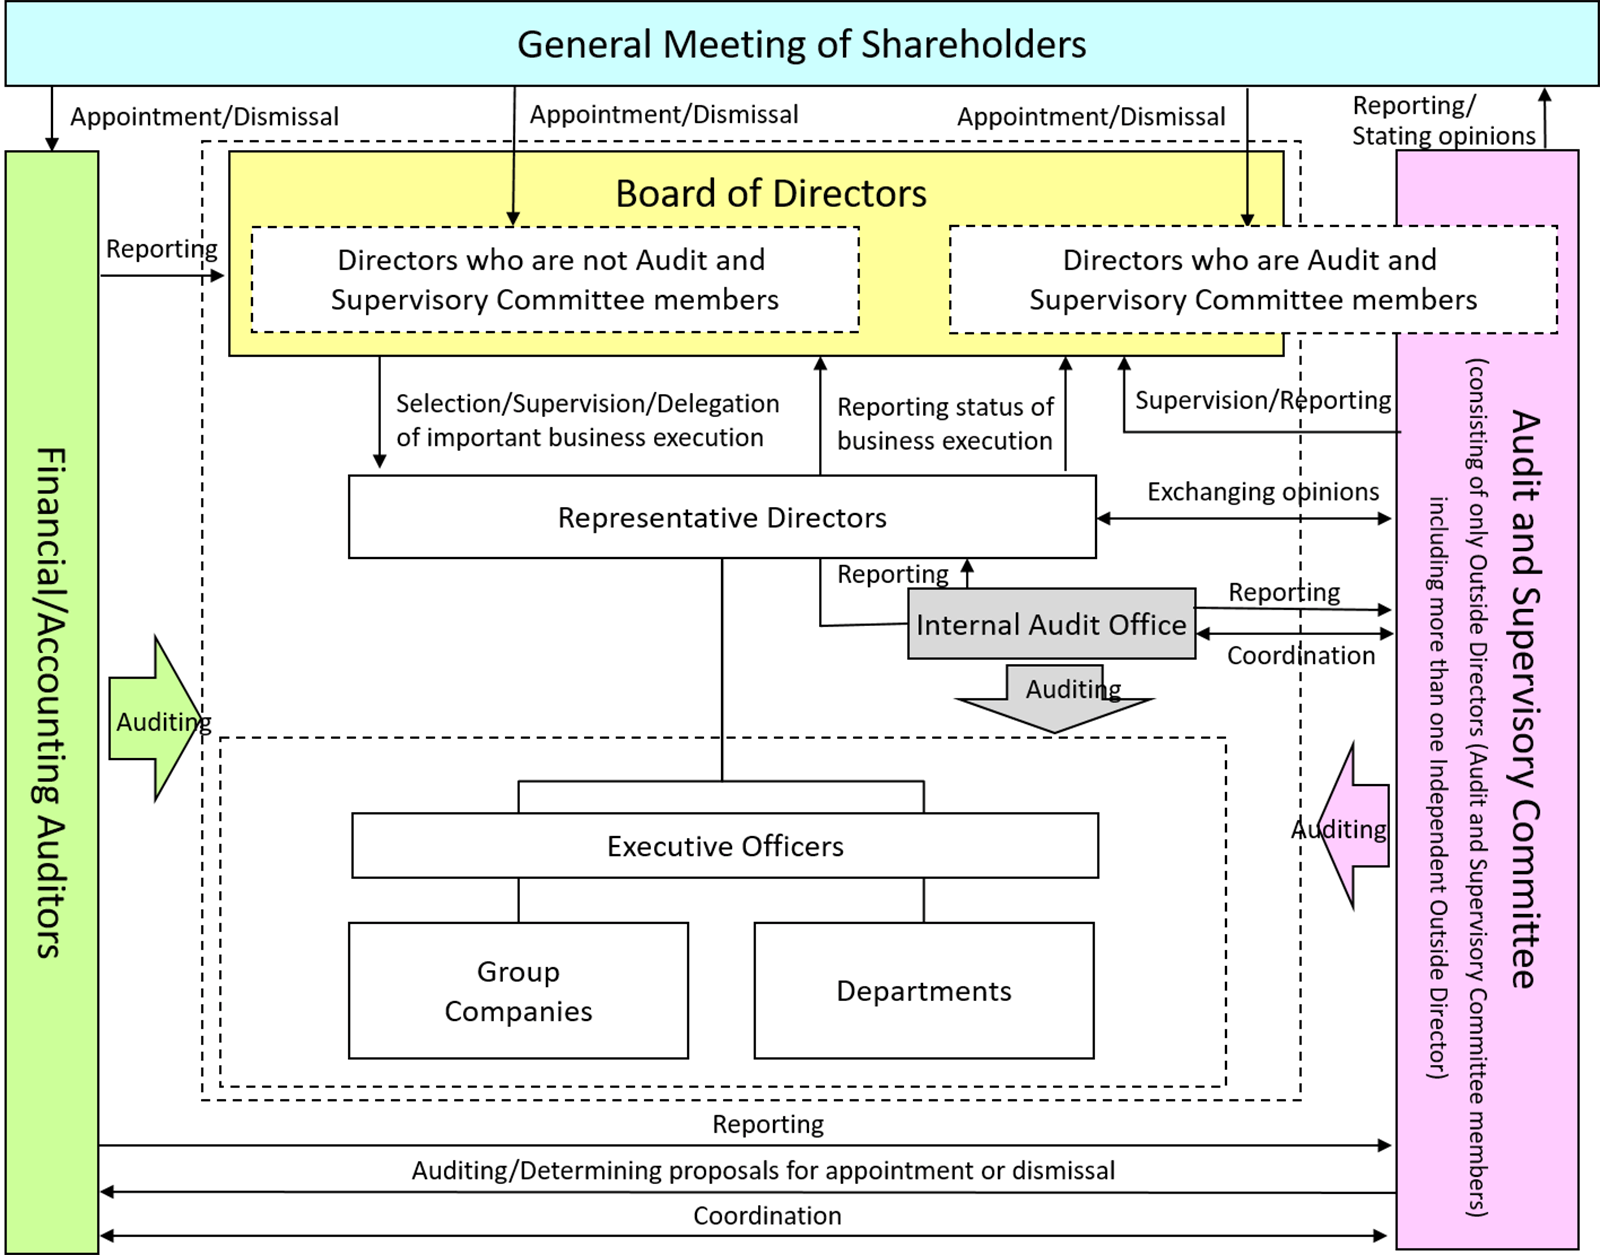 Chart of Corporate Governance System